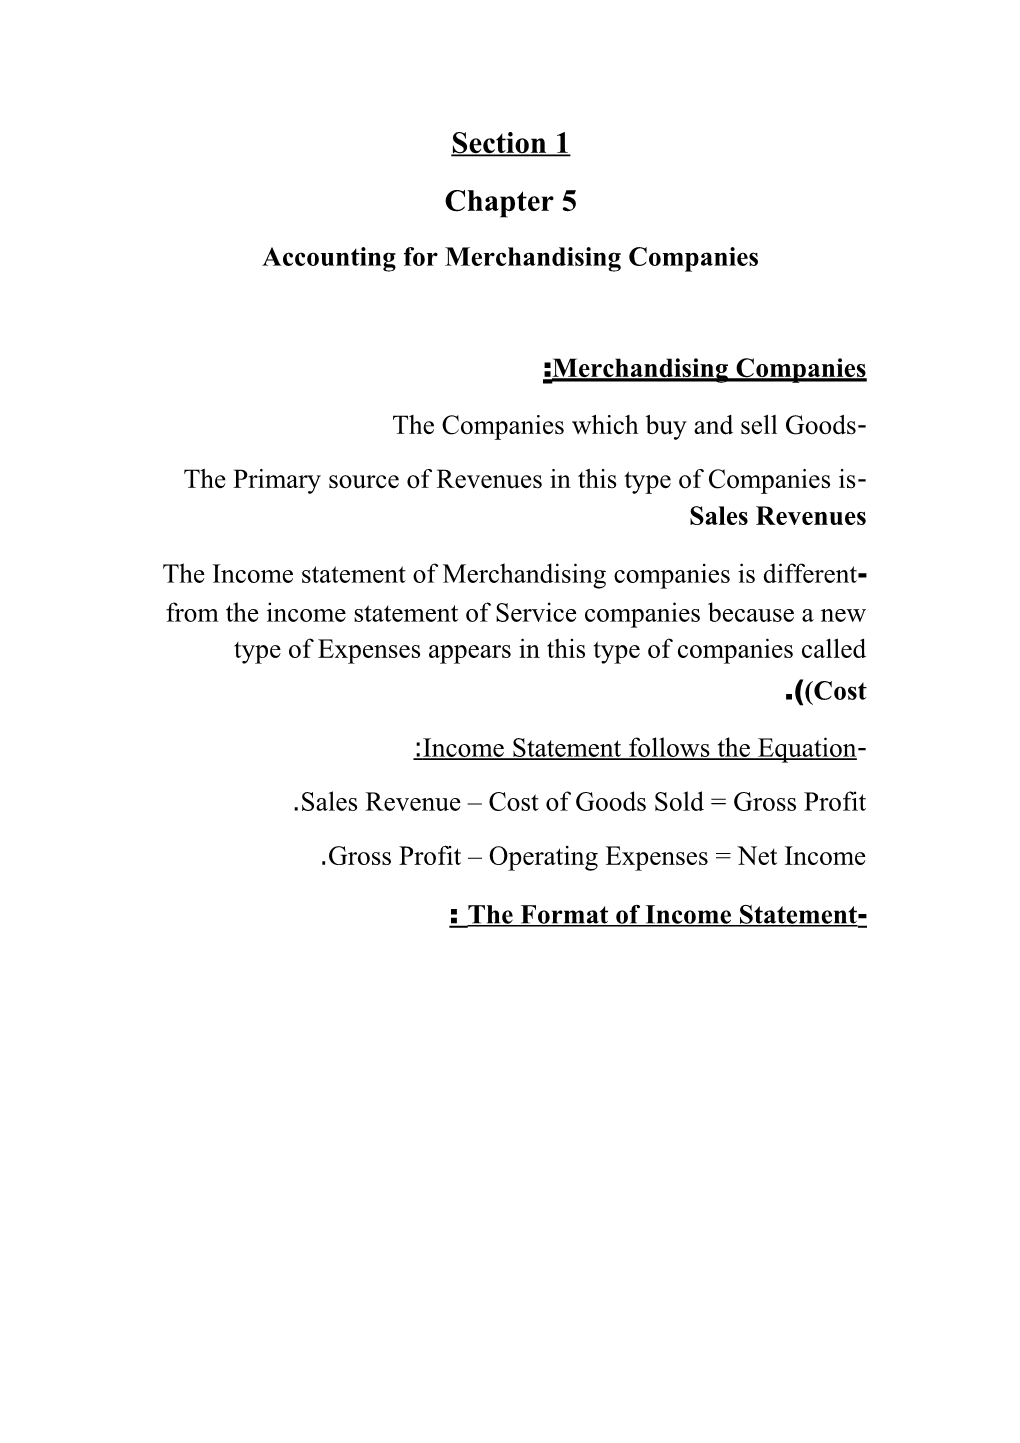 Accounting for Merchandising Companies